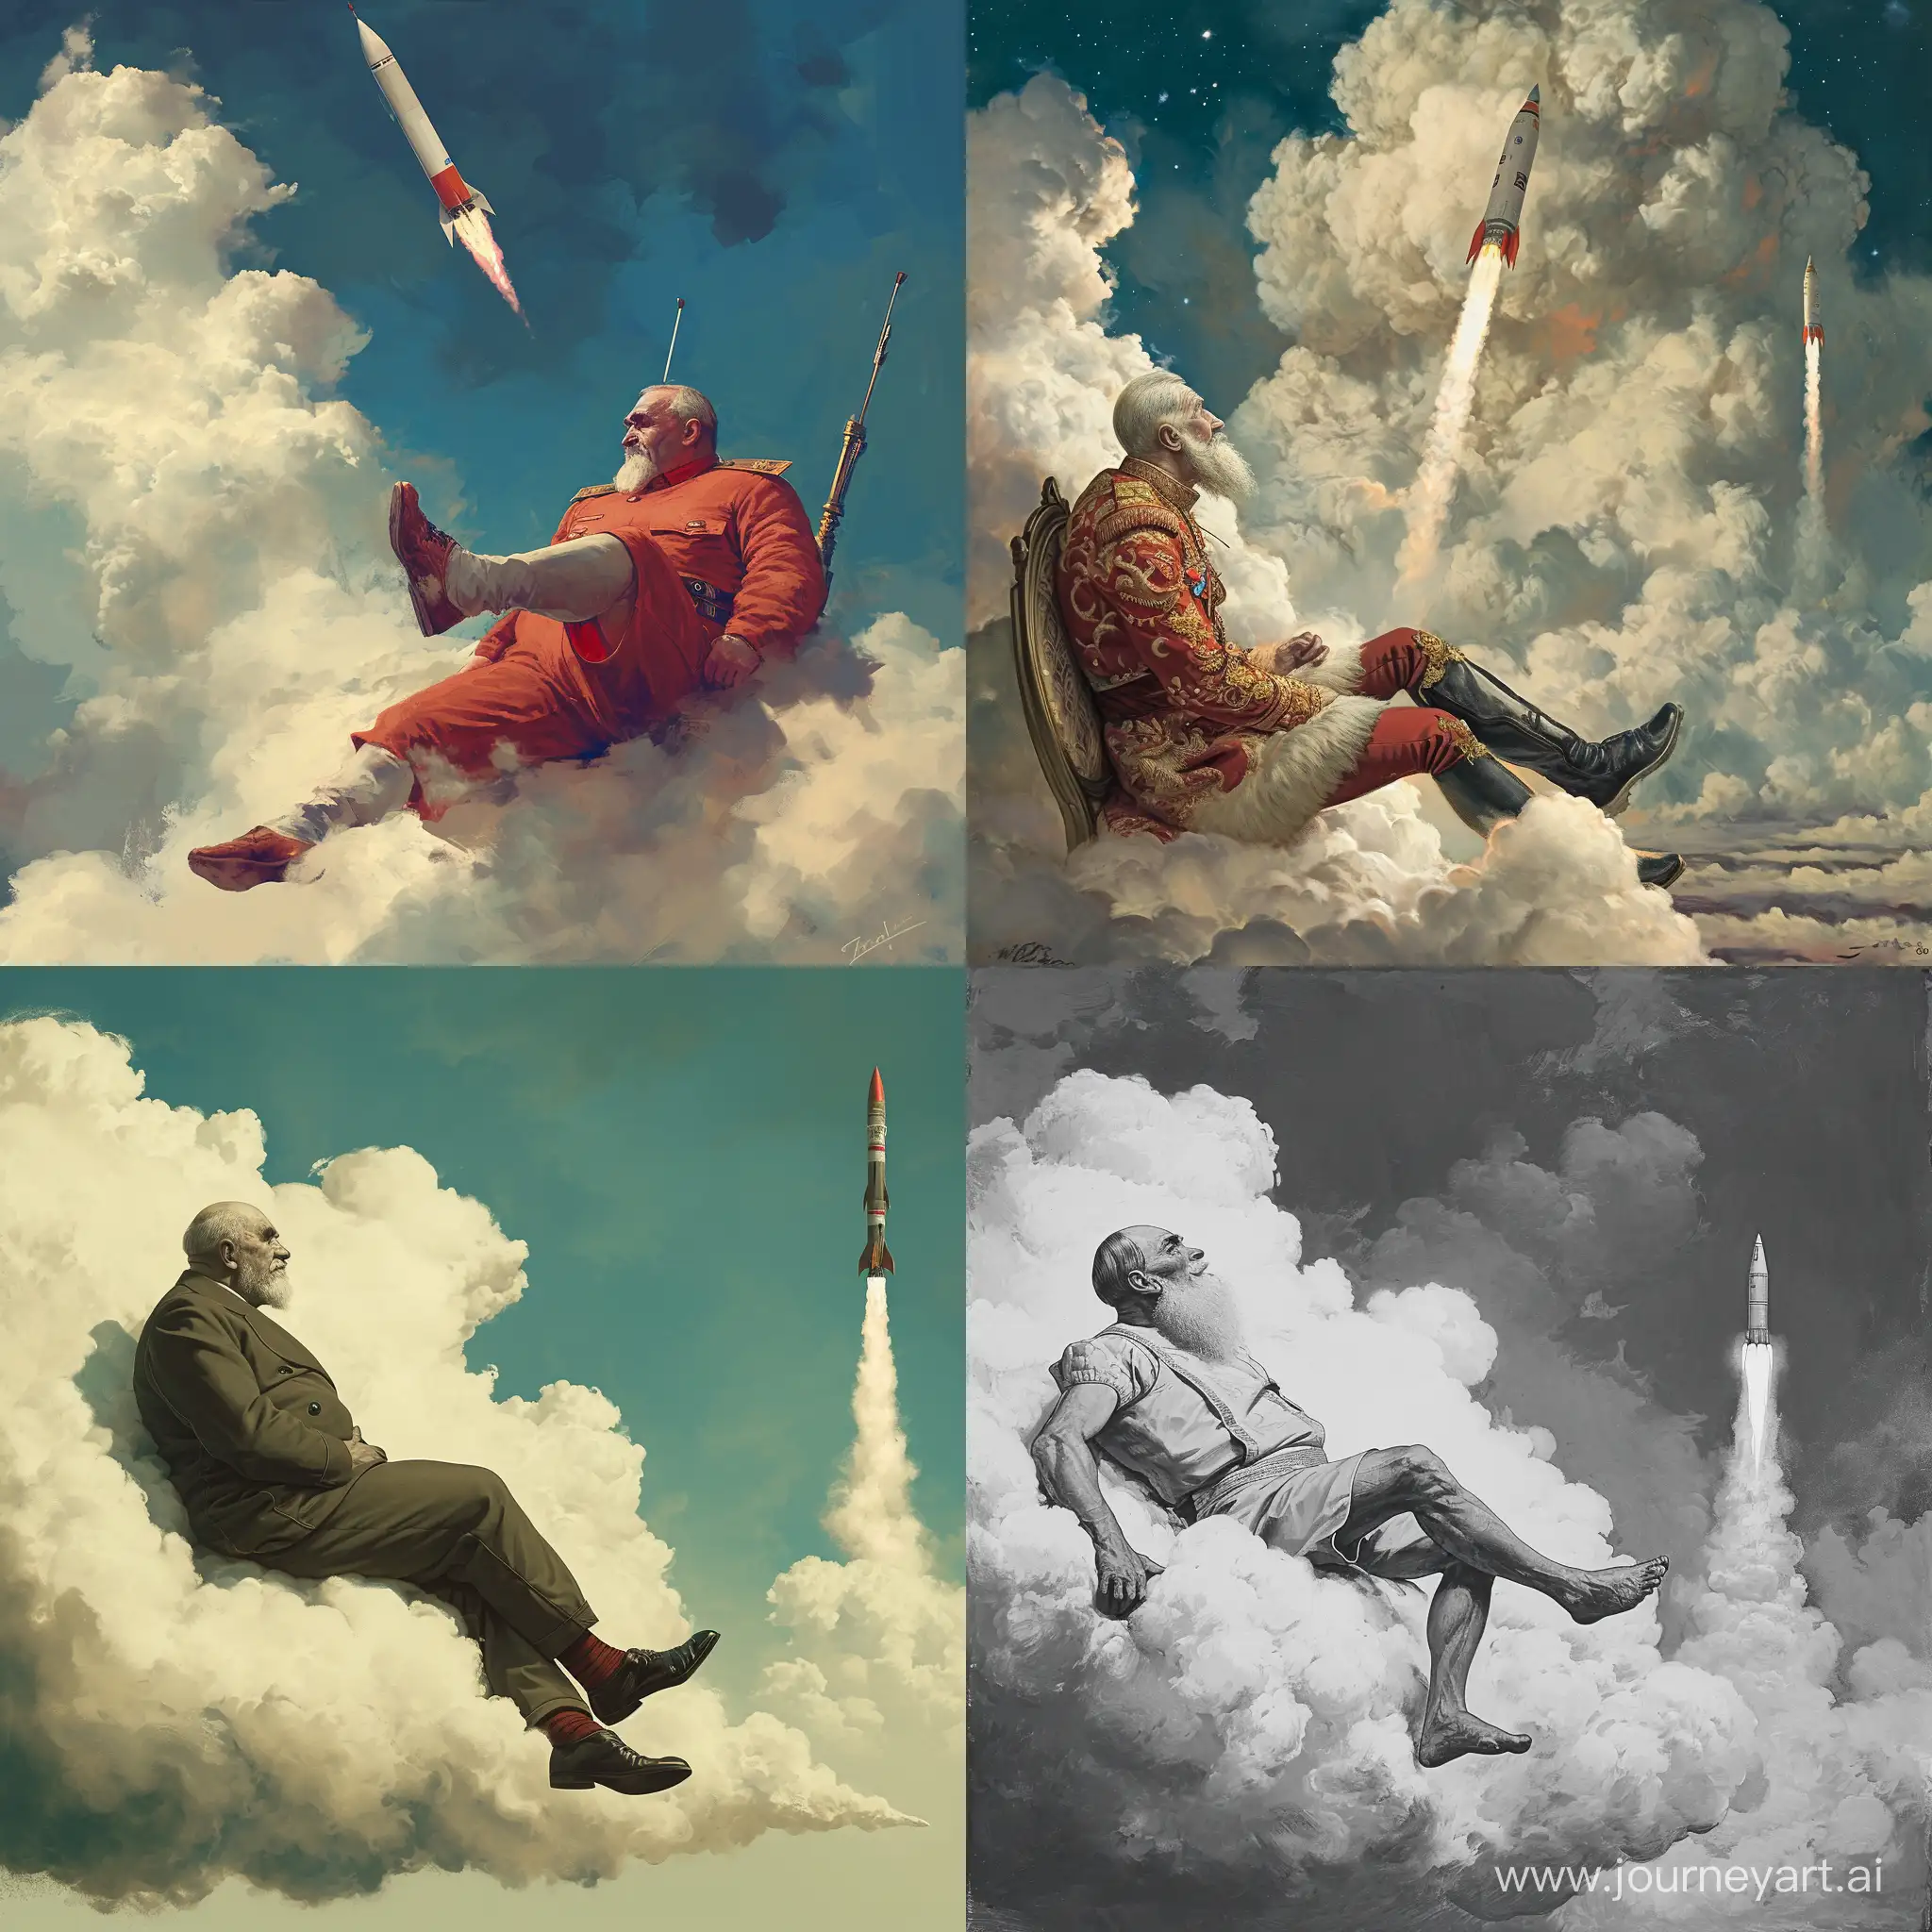 Vladimir Zhirinovsky sits on a cloud with his legs dangling and looks at a passing rocket